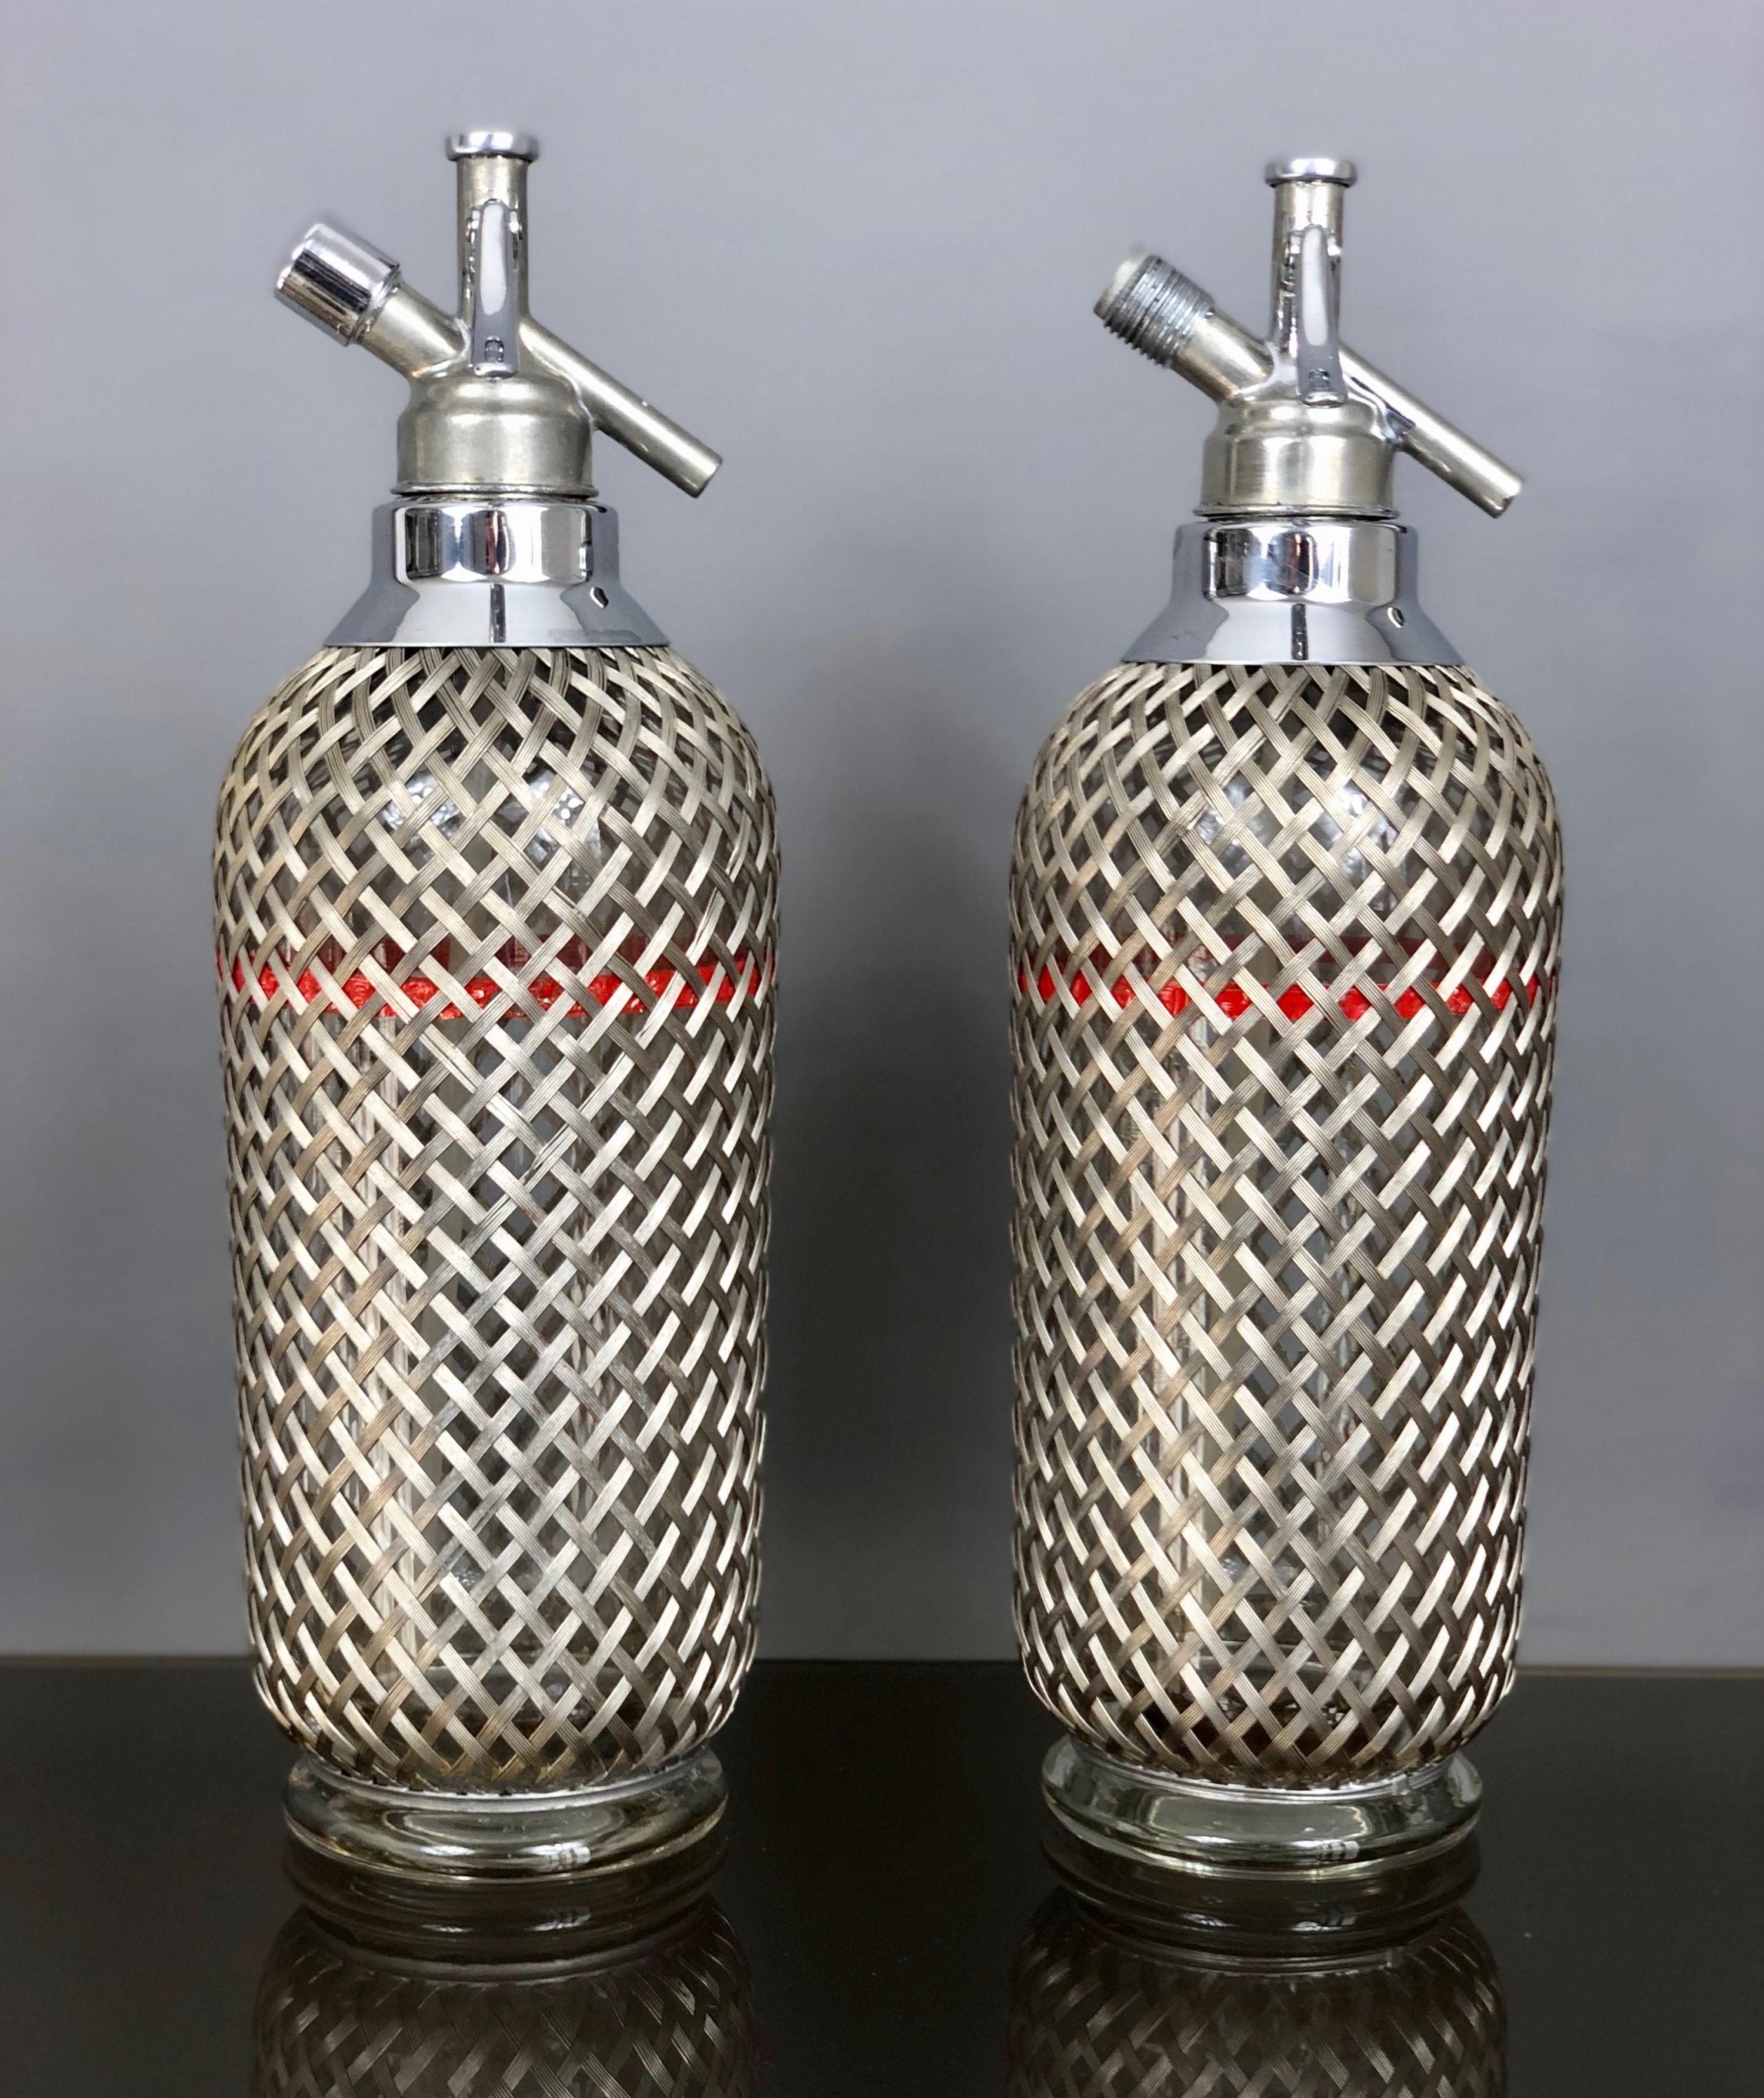 Midcentury English siphons in glass covered by a metal grid. It has the trademark engraved on the bottleneck.
 